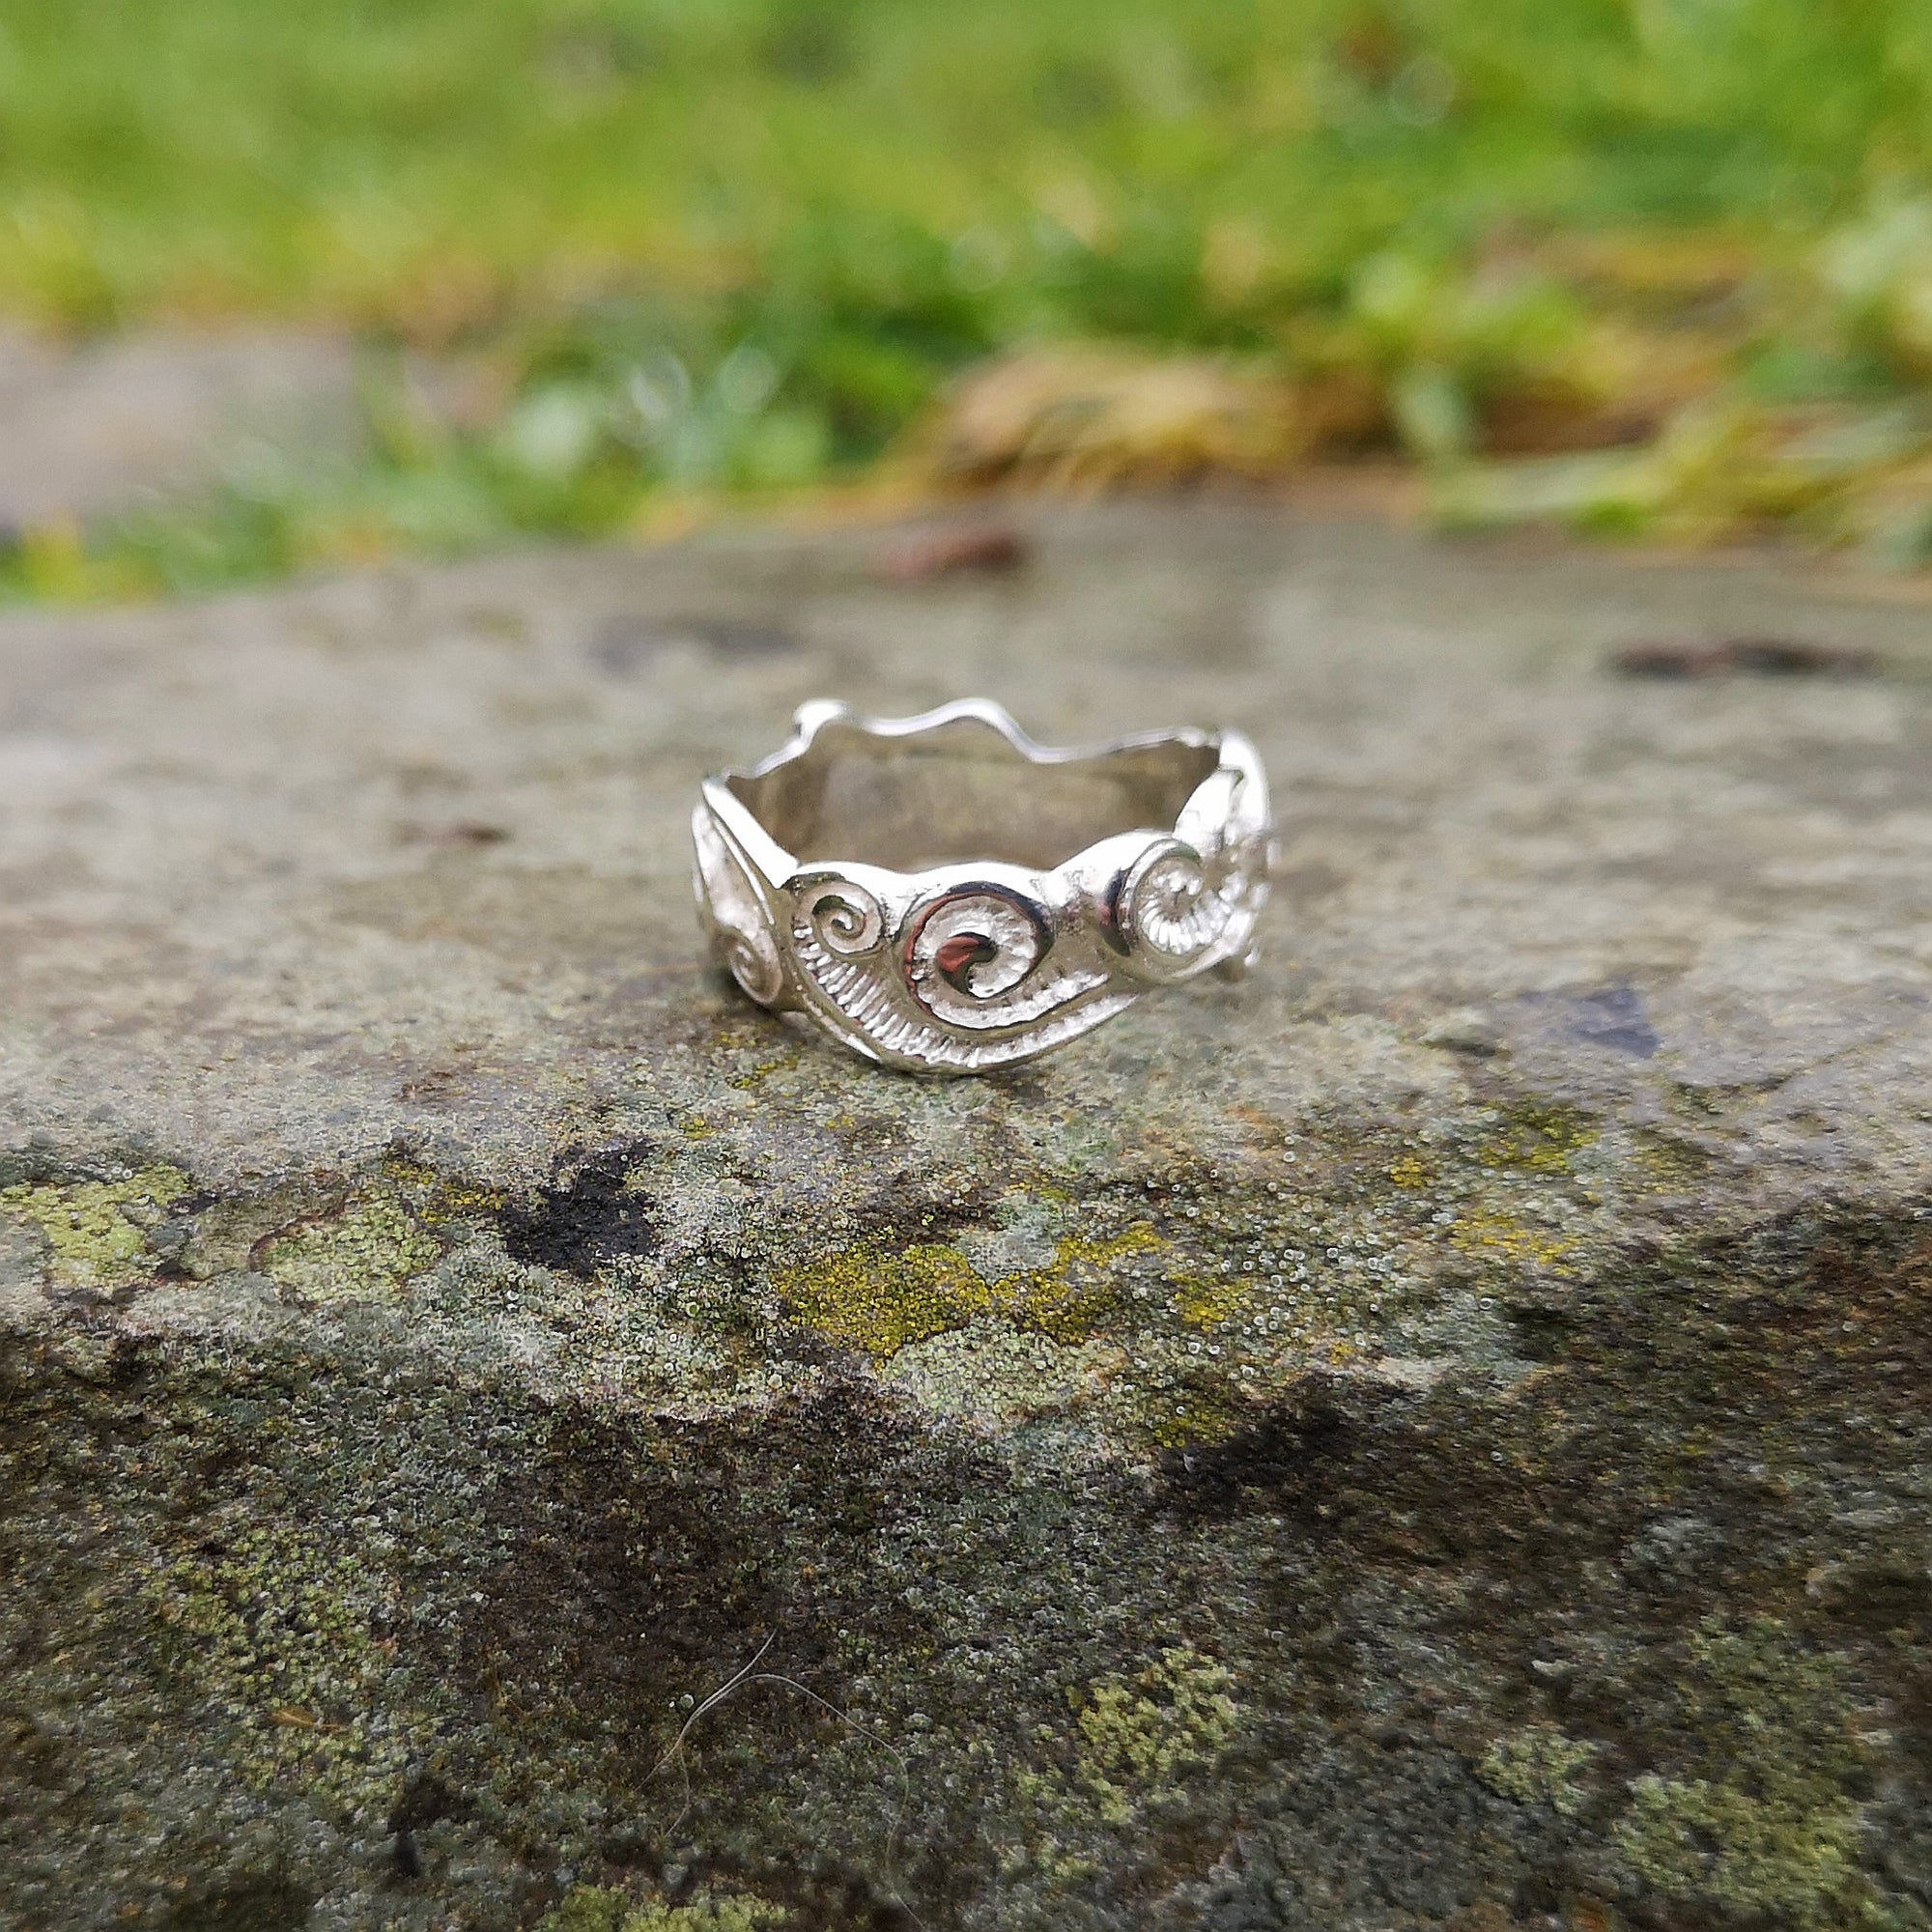 The sterling silver Celtic Spirals Wedding Ring perched on a smooth rock outside. This Irish wedding ring is handmade in Ireland by Elena Brennan.